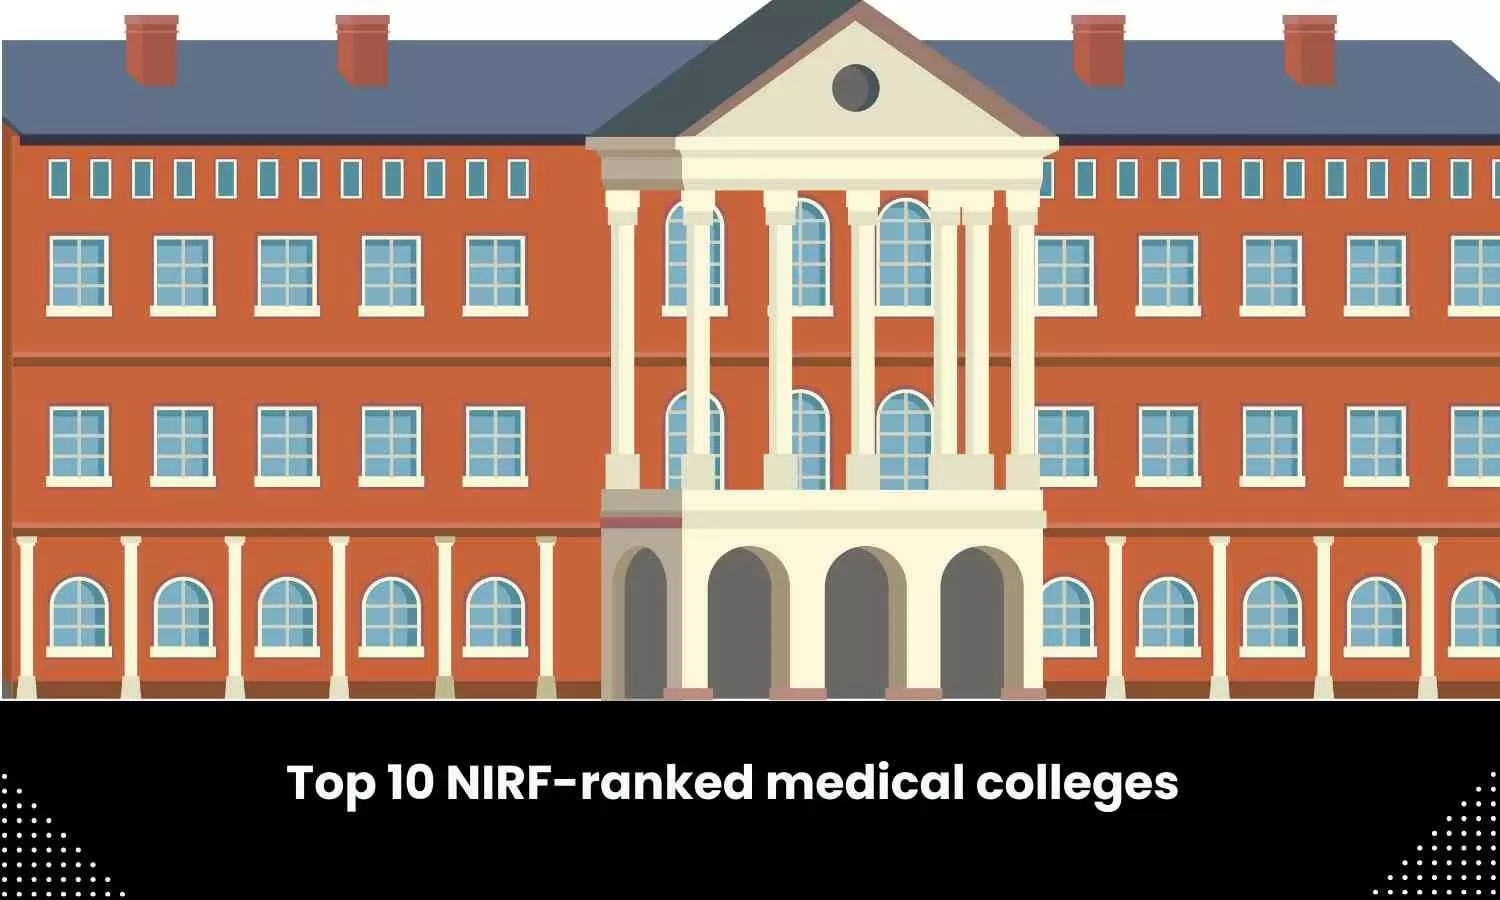 List of top 10 medical colleges in India as per NIRF Rankings